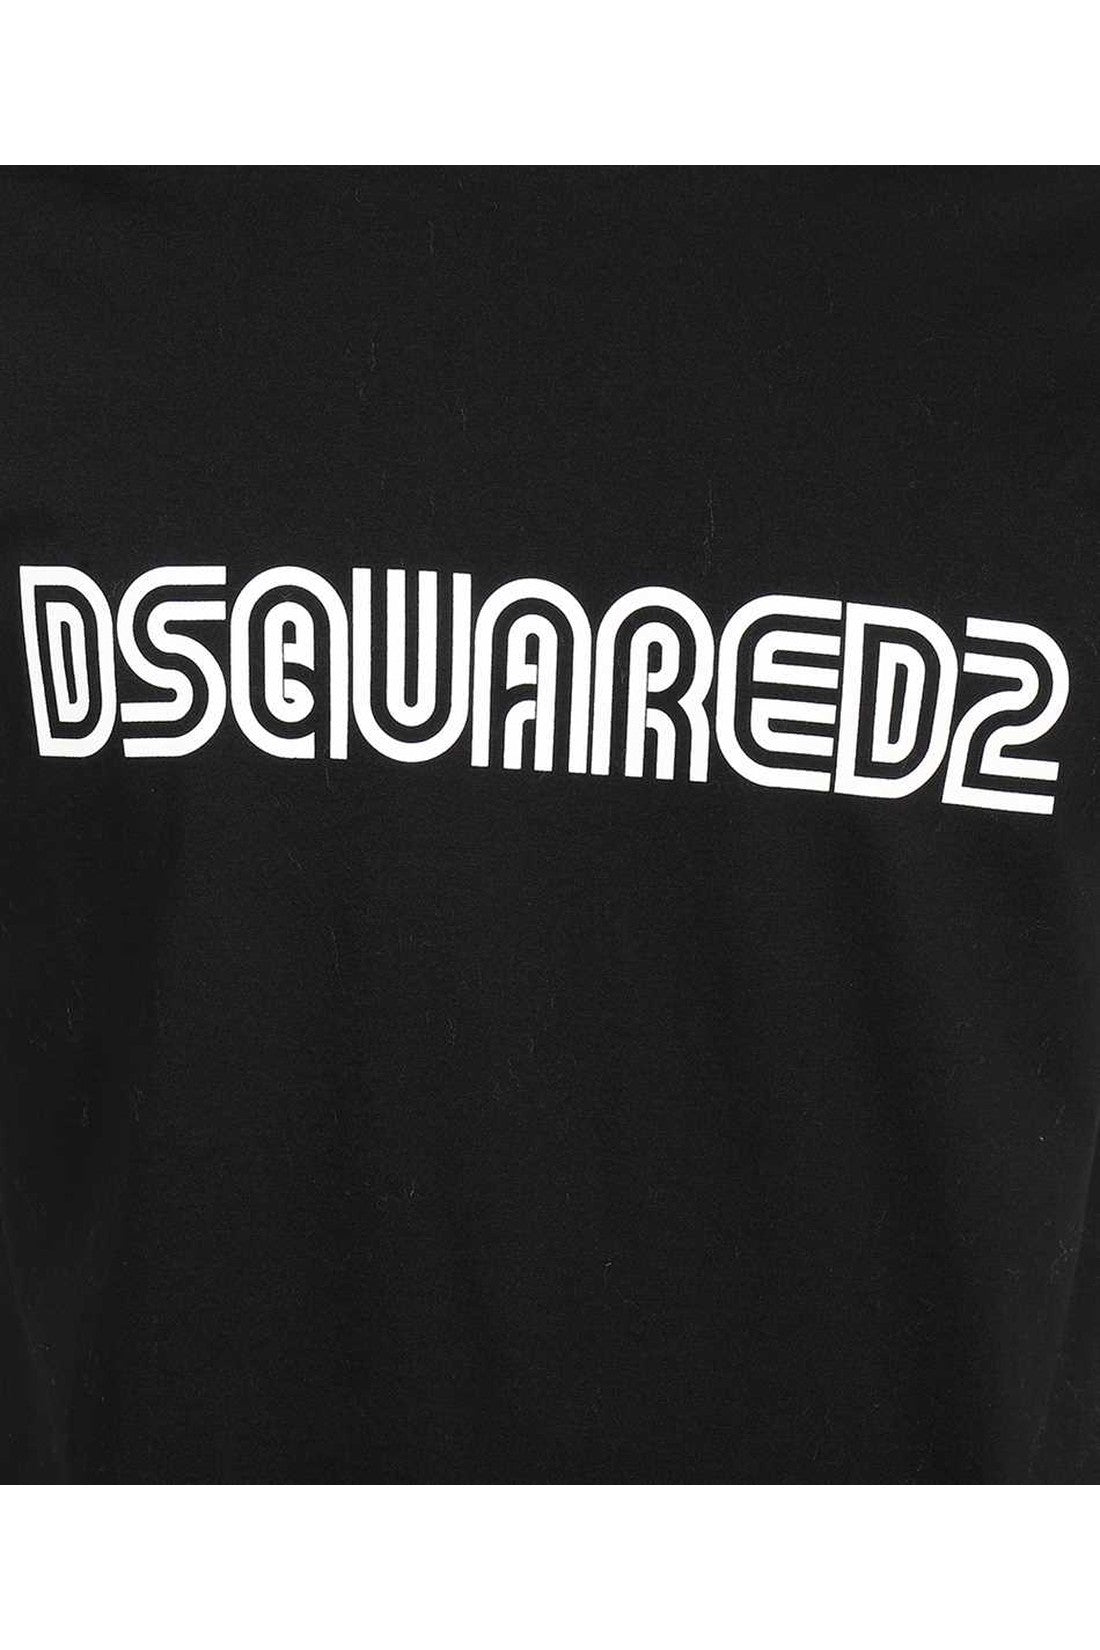 Dsquared2-OUTLET-SALE-Crew-neck-t-shirt-Shirts-ARCHIVE-COLLECTION-3.jpg